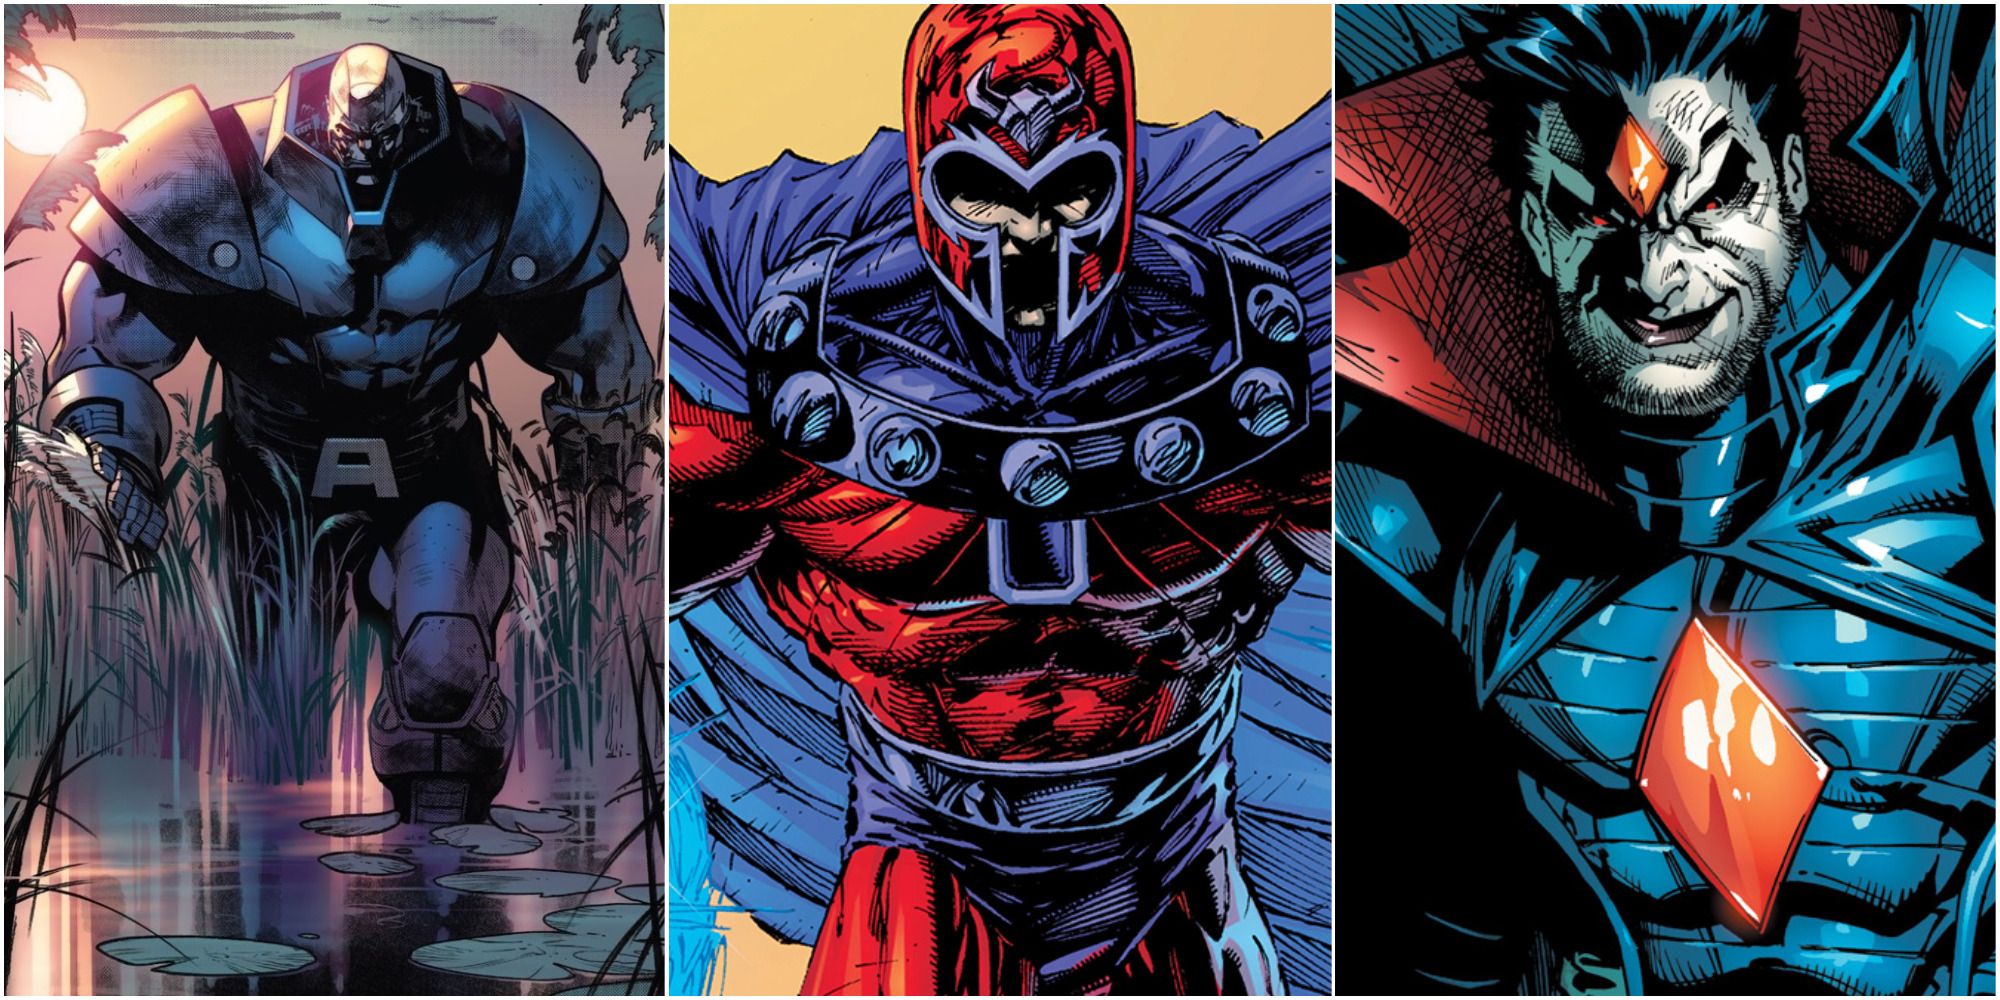 Apocalypse, Magneto, and Mister Sinister